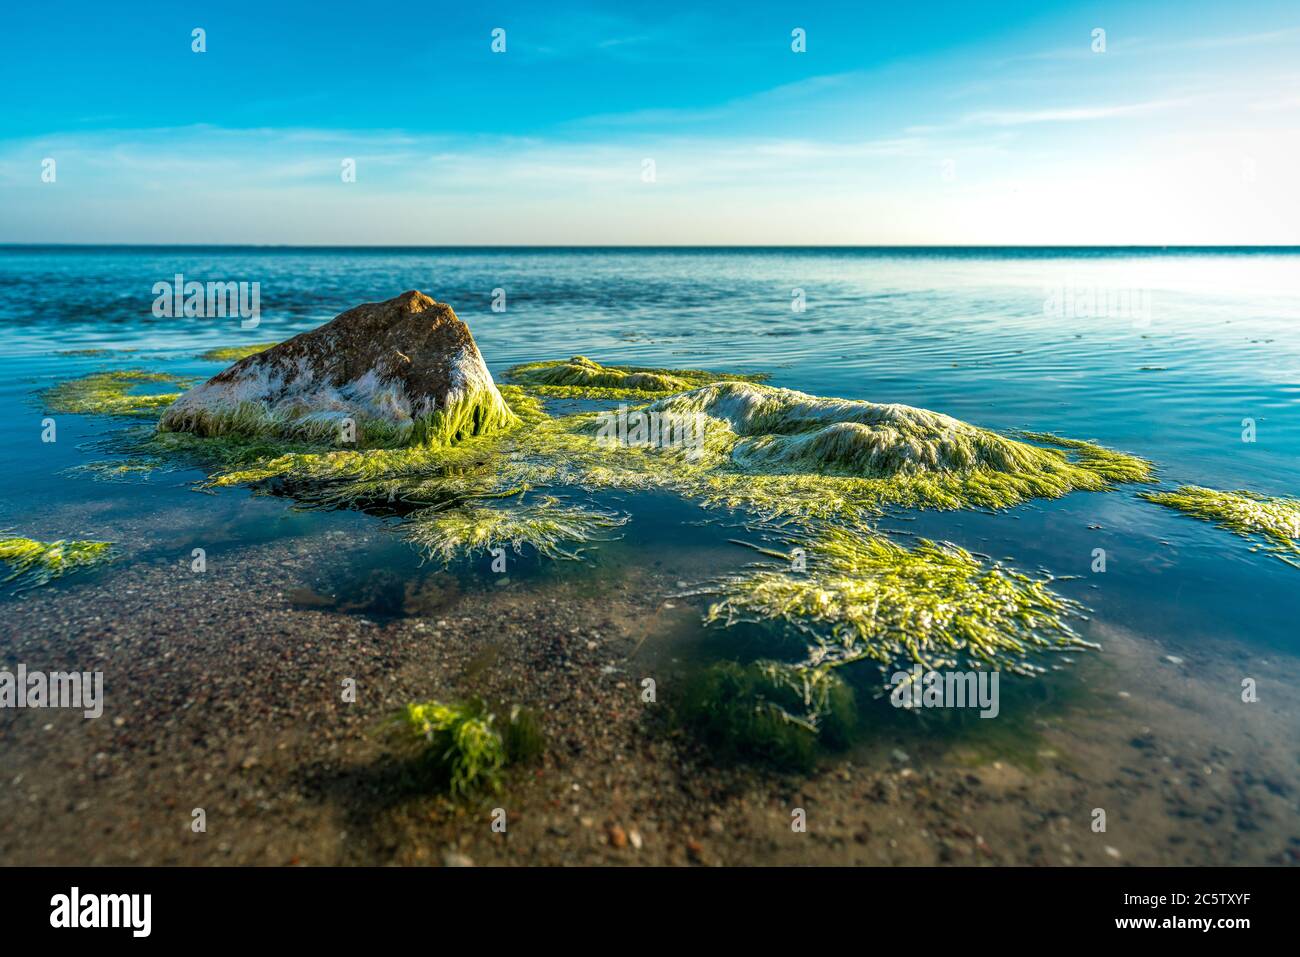 Green algae moving in the clear ocean water of the baltic sea Stock Photo